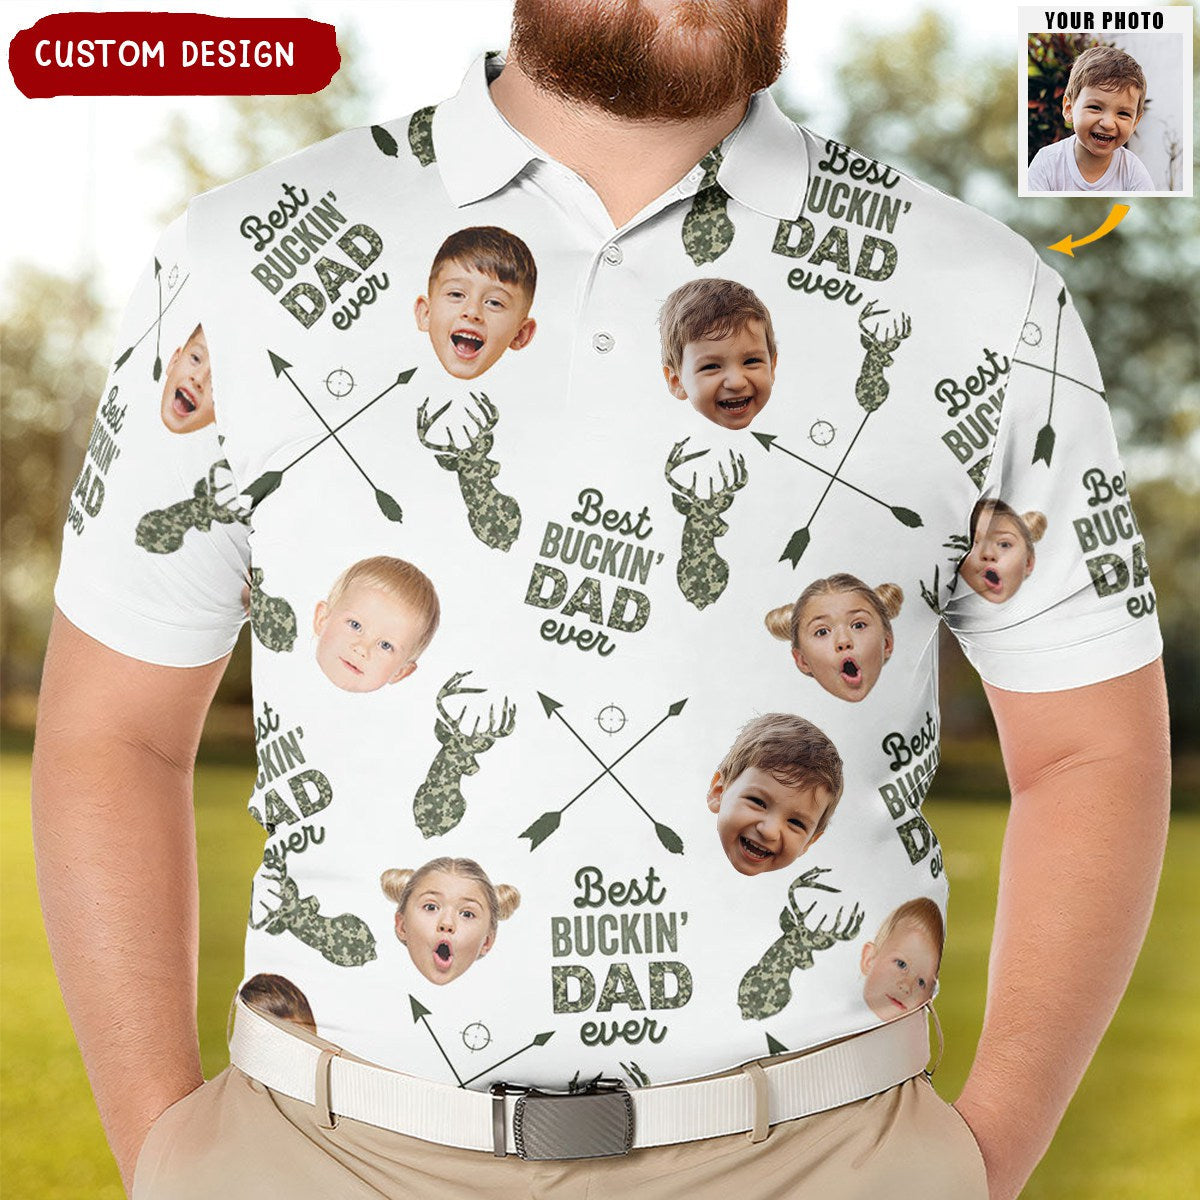 Best Buckin' Dad Ever - Personalized Photo Polo Shirt